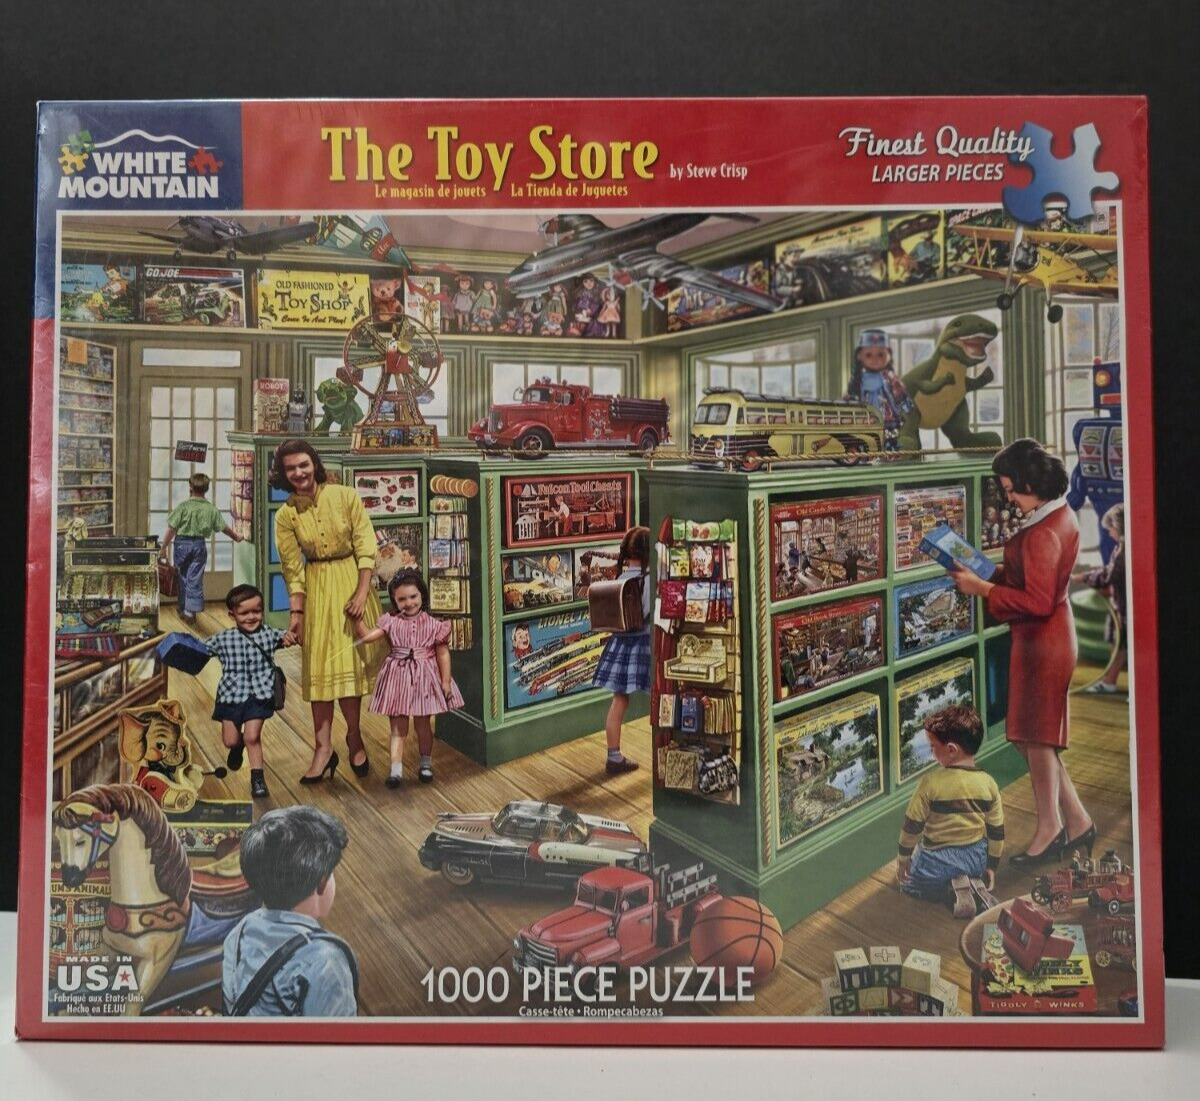 White Mountain 1000 Piece Puzzle The Toy Store By Steve Crisp NEW Sealed